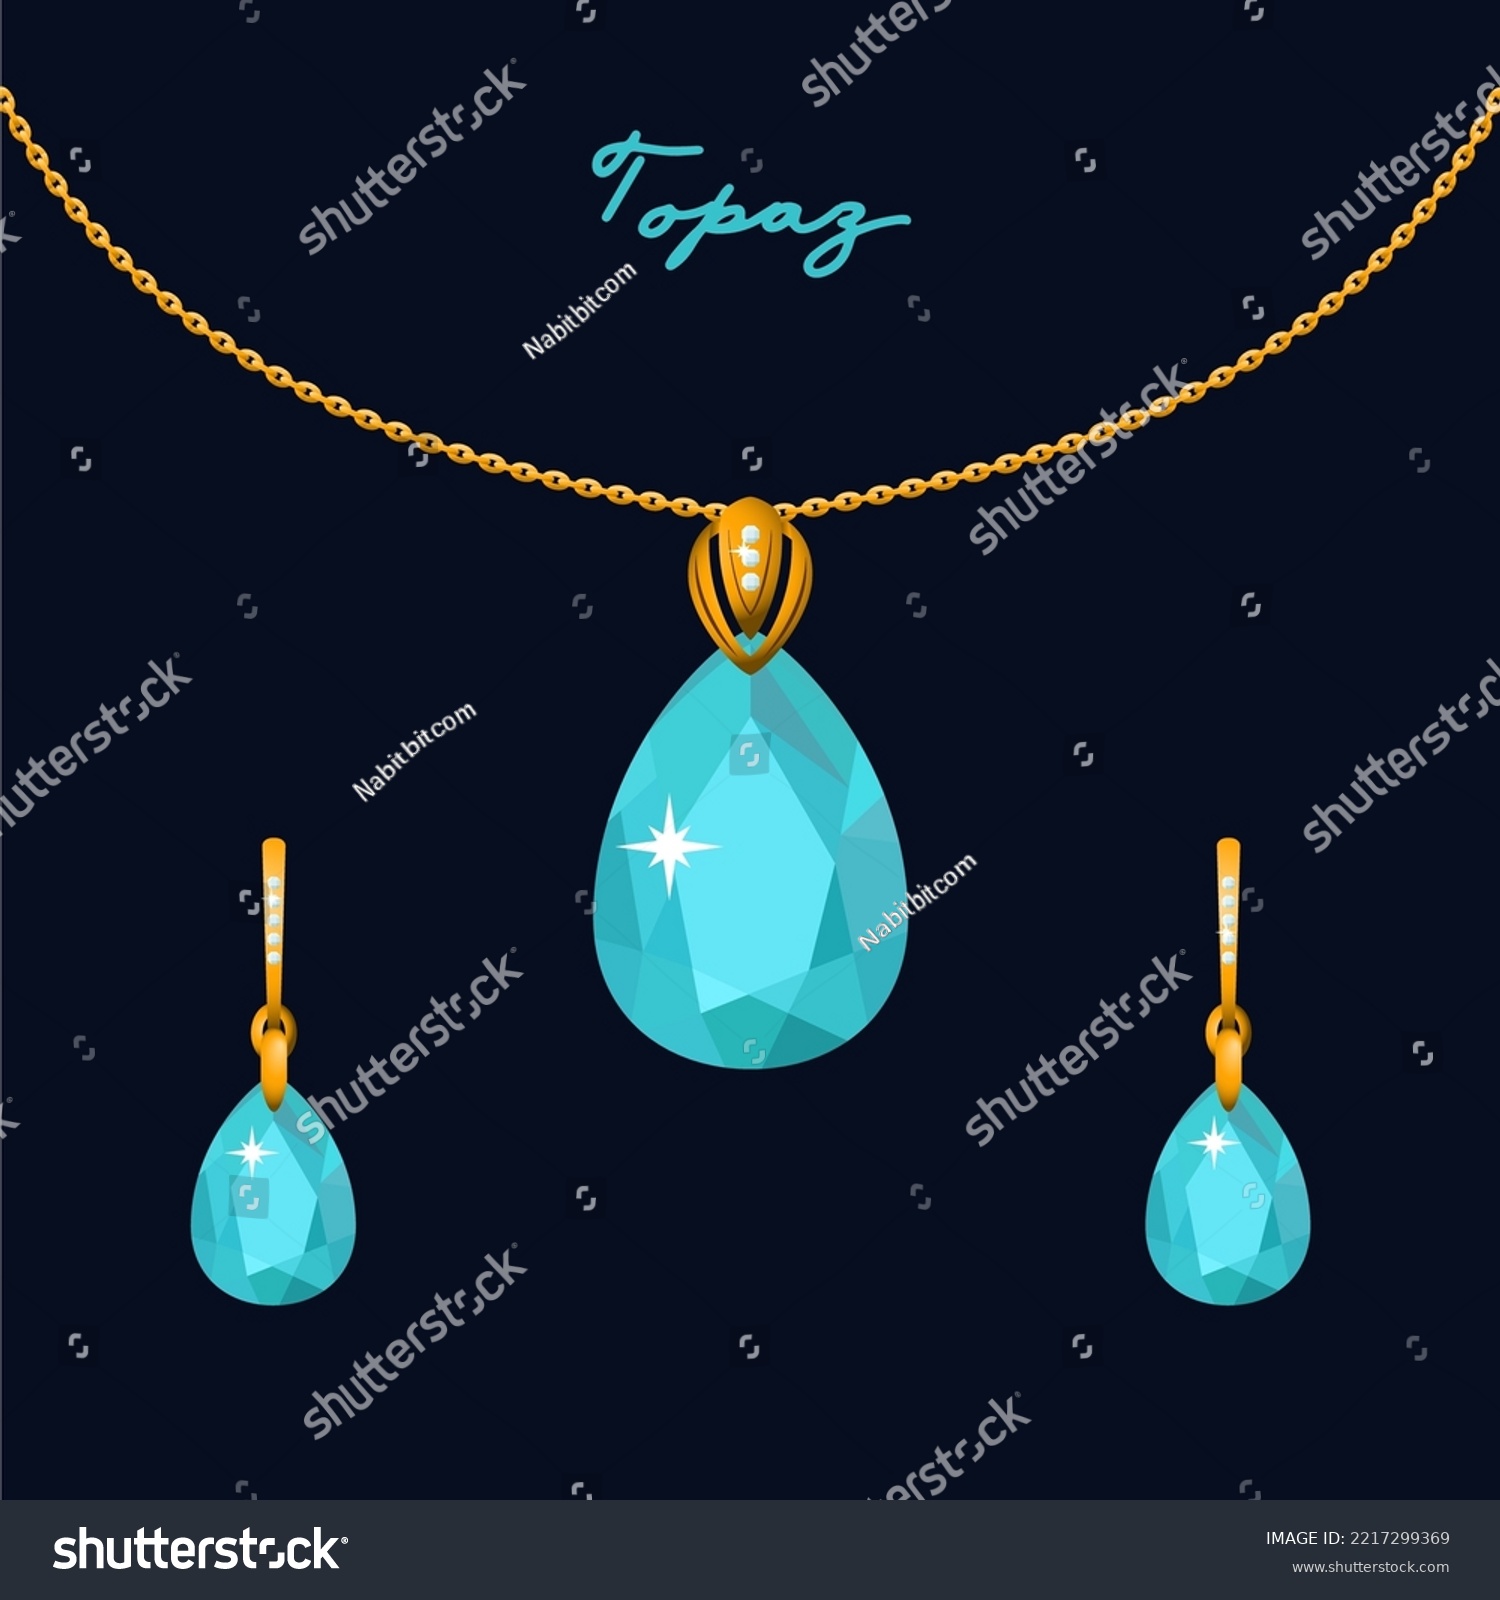 SVG of Illustration set of gold jewelry pendant on a chain and earrings with topaz svg